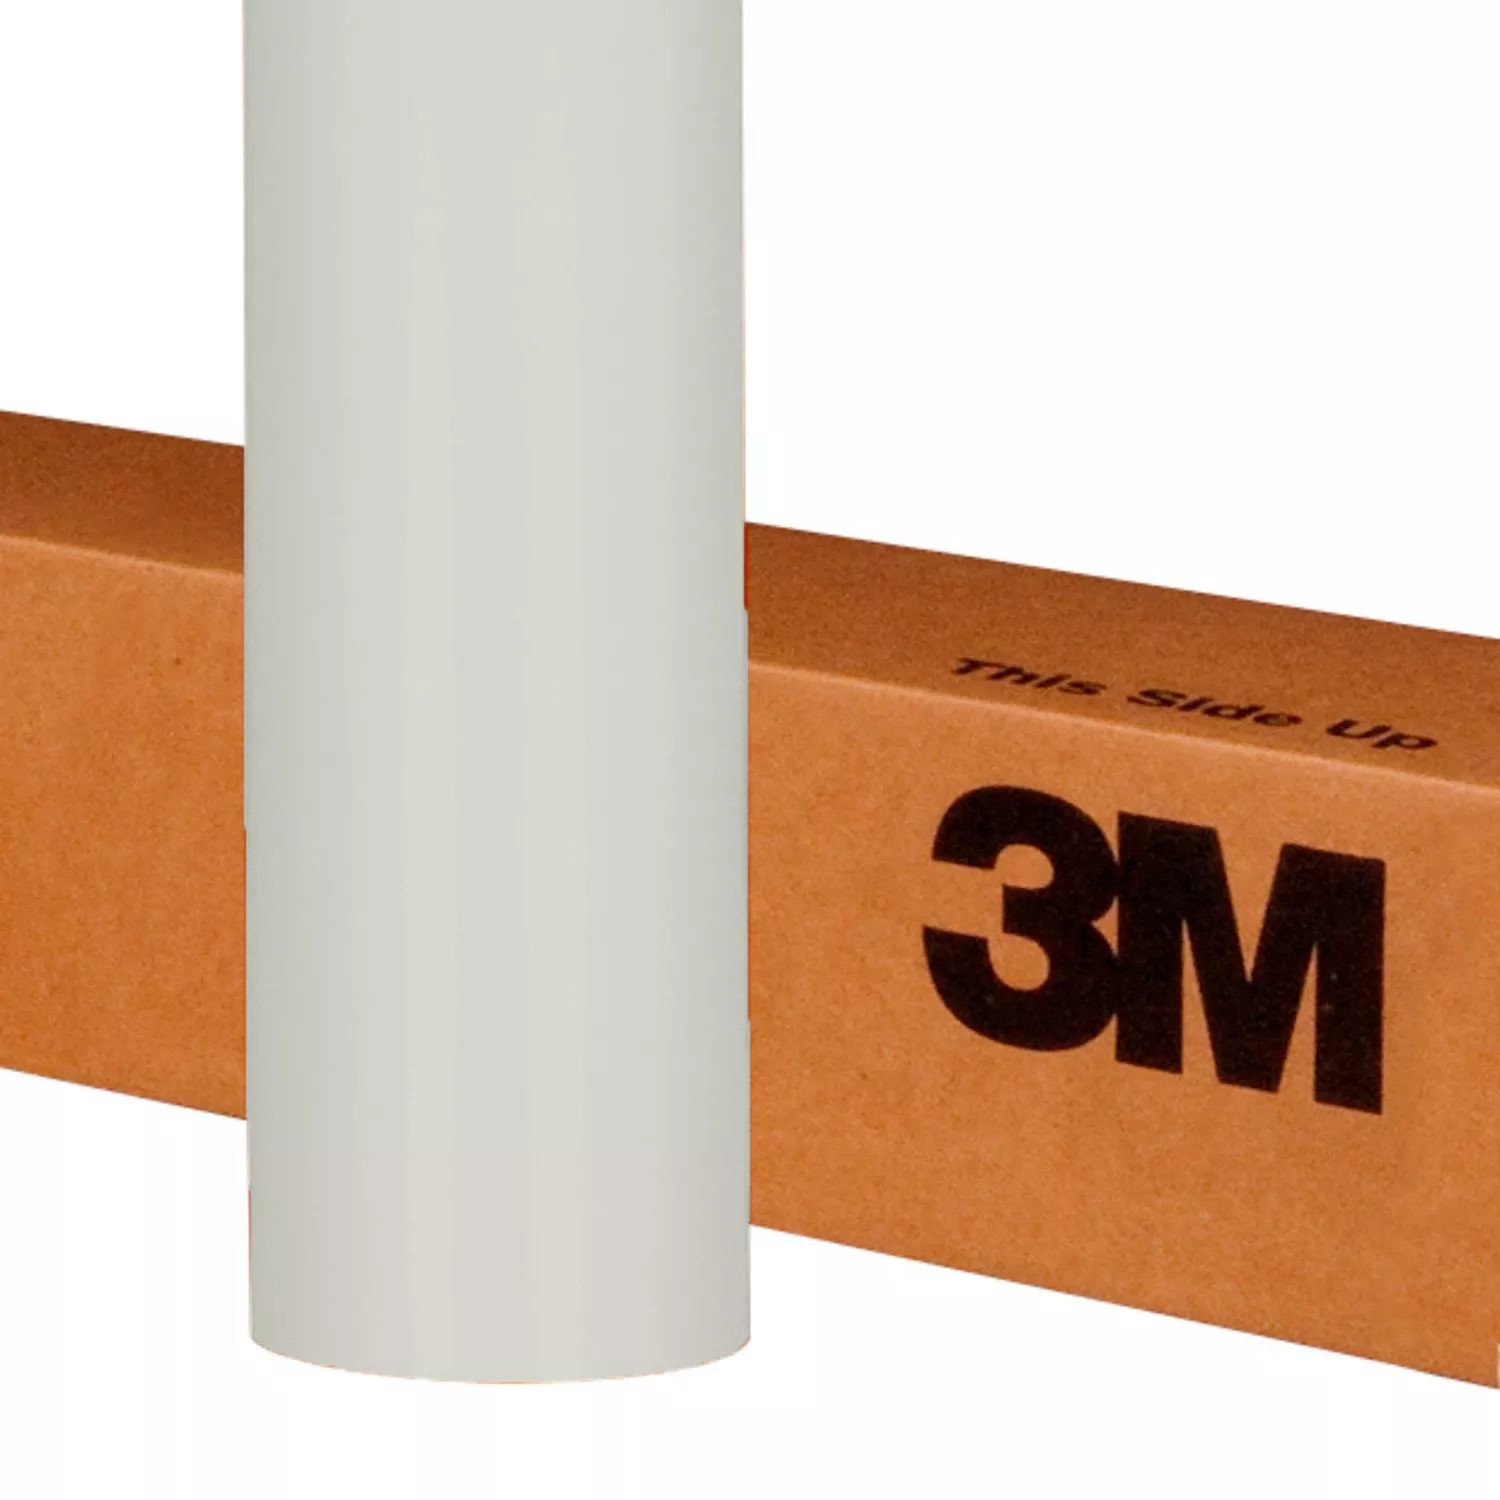 3M™ Scotchcal™ ElectroCut™ Graphic Film 7725-121, Light Gray, 48 in x 50
yd